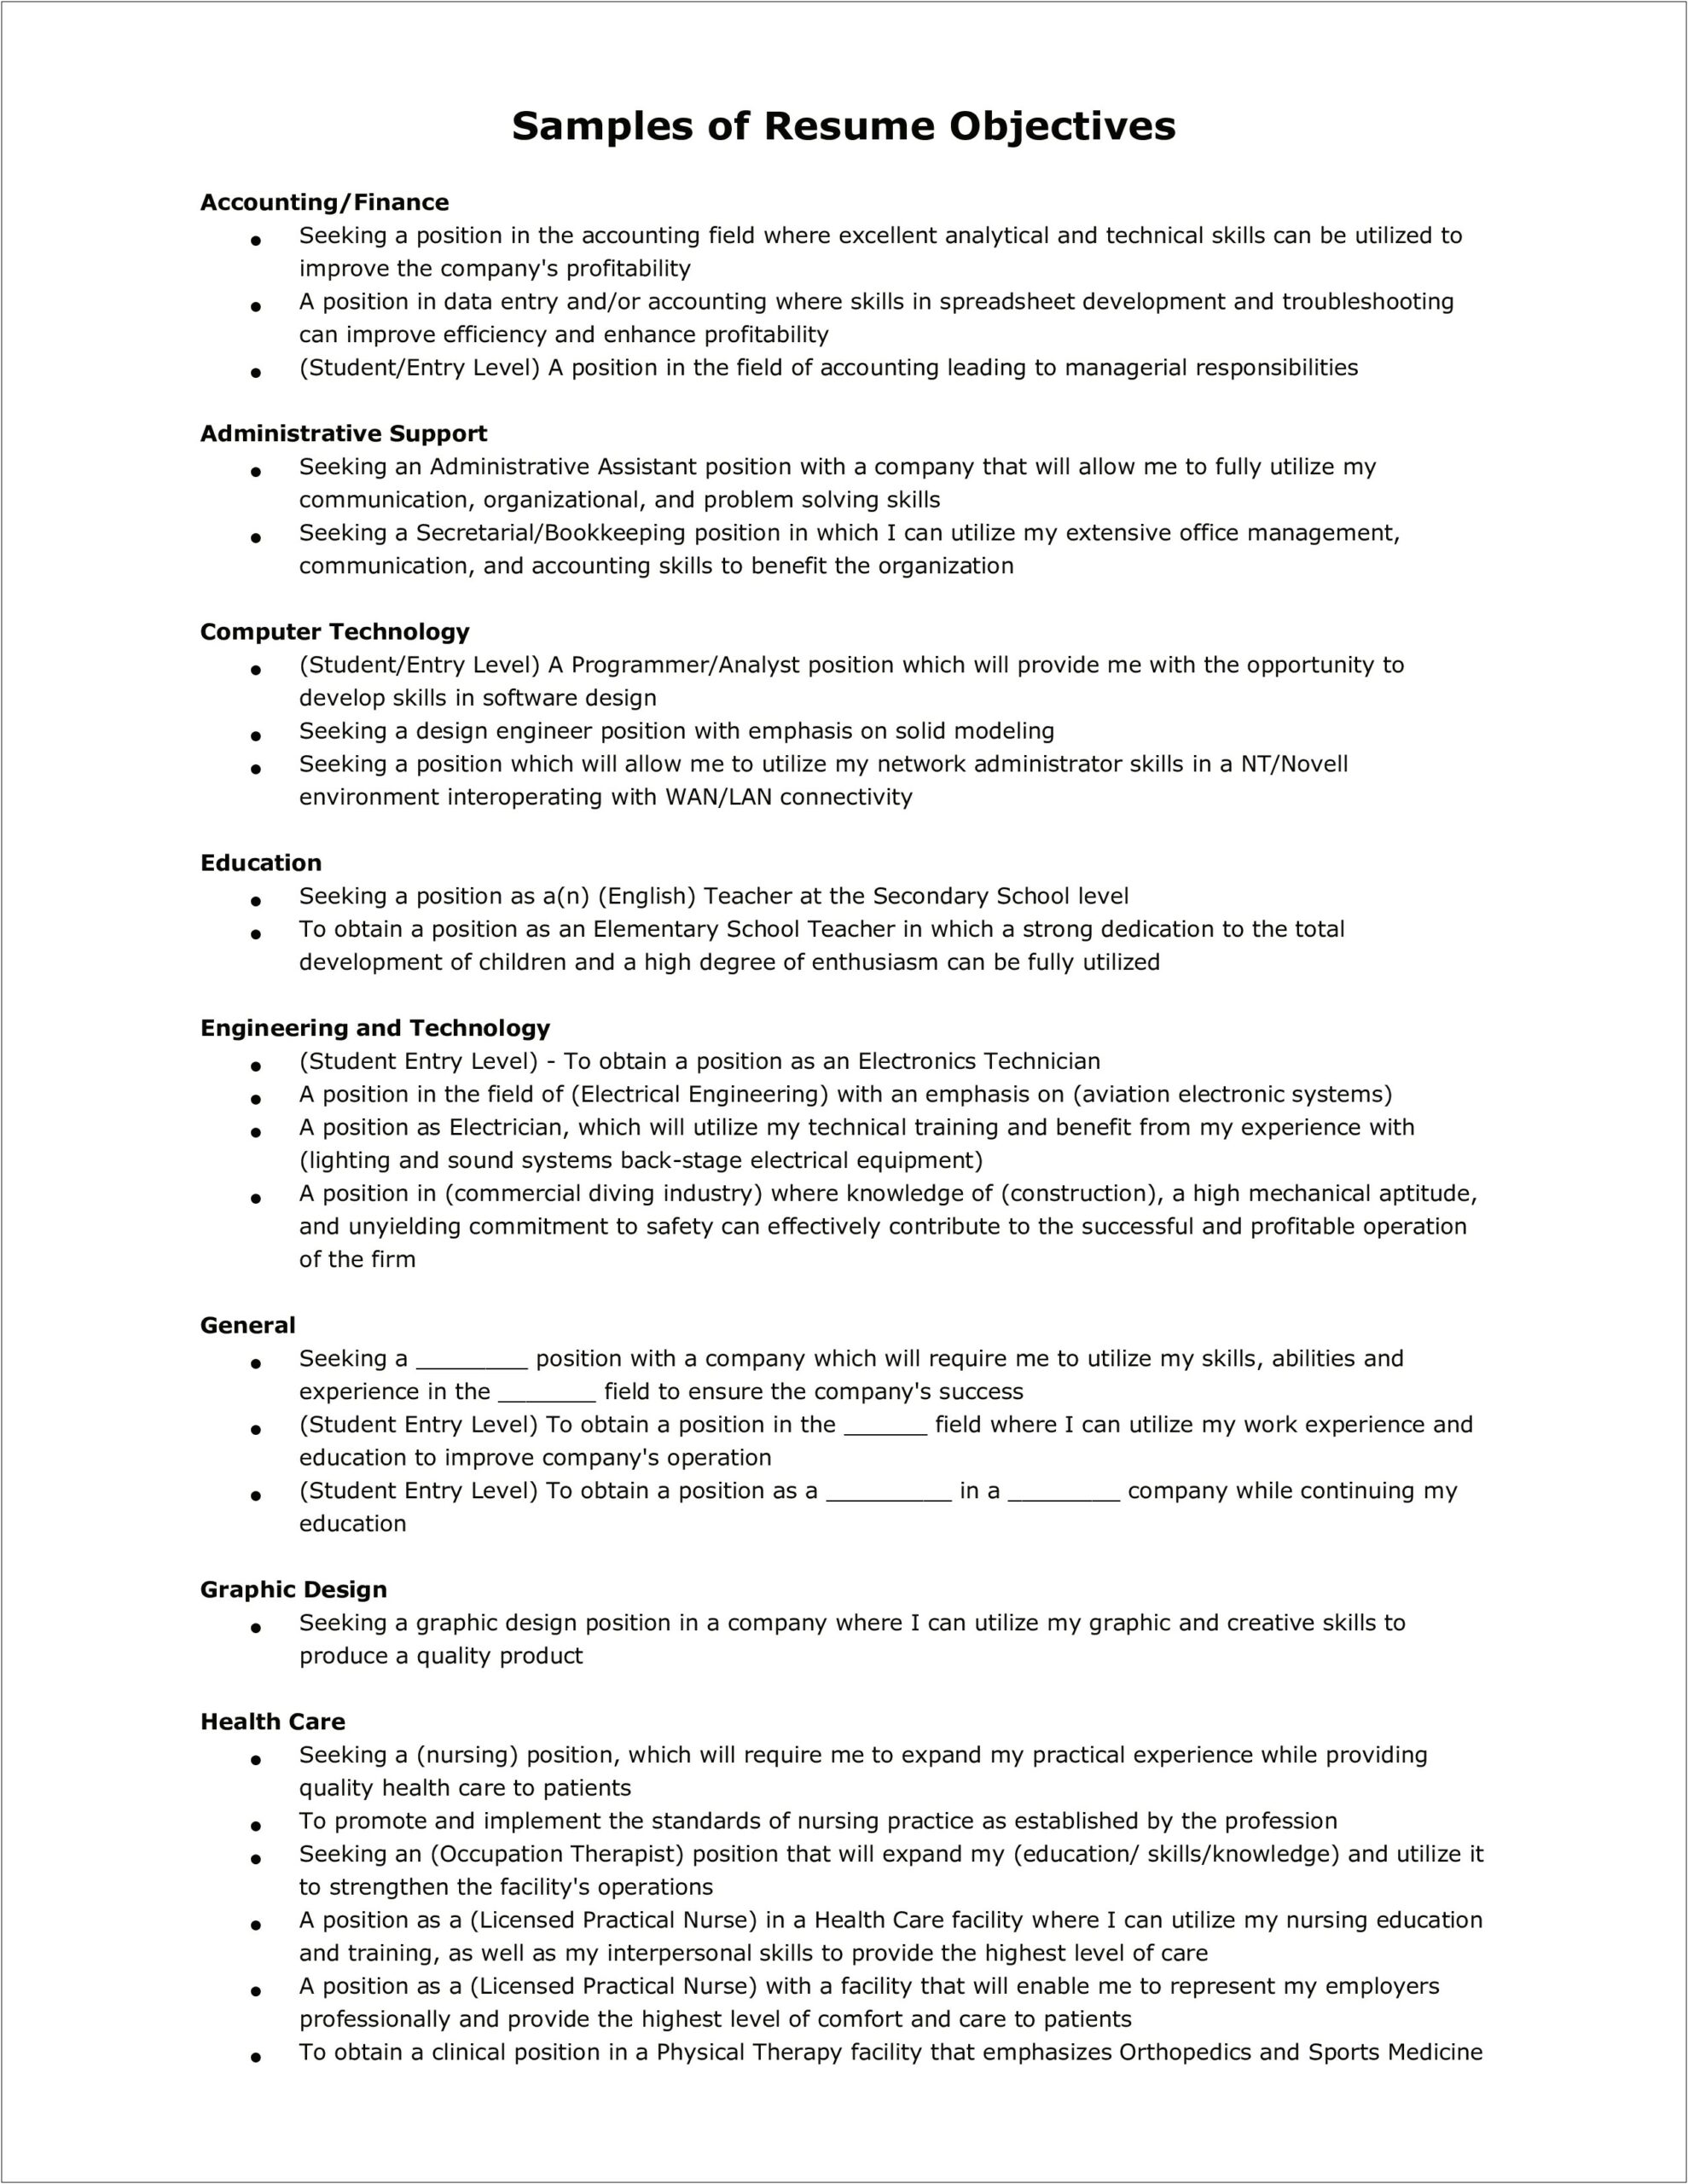 Resume Objective For A Principal